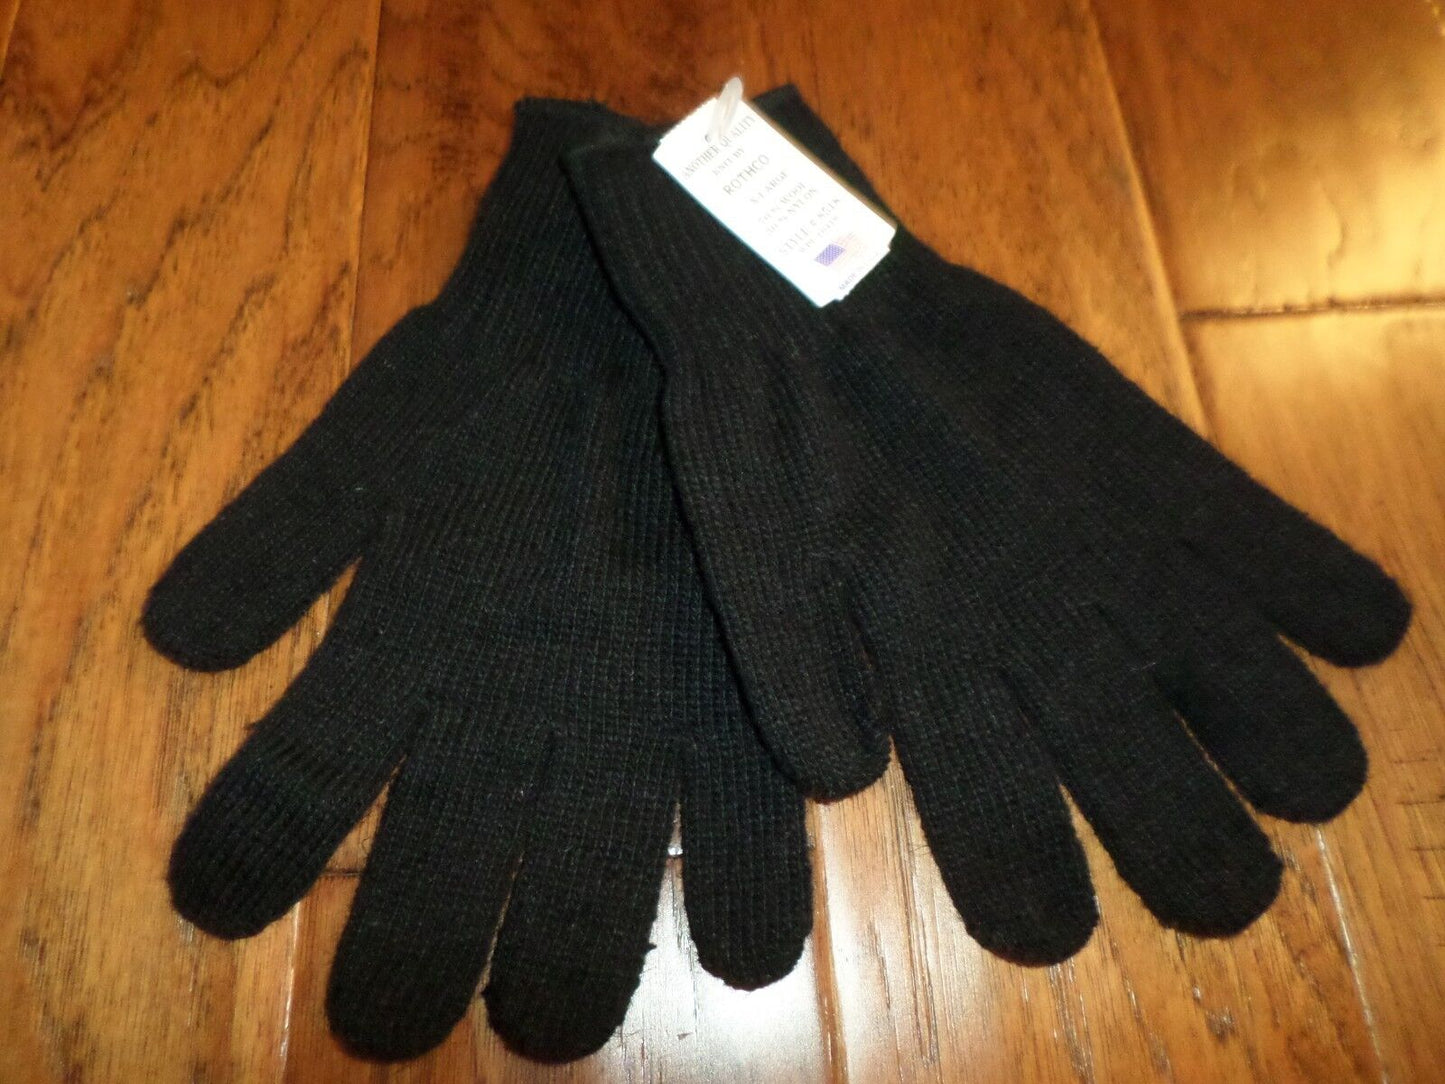 MILITARY STYLE D3A COLD WEATHER GLOVE LINERS 70% WOOL 30% NYLON SIZE X- LARGE